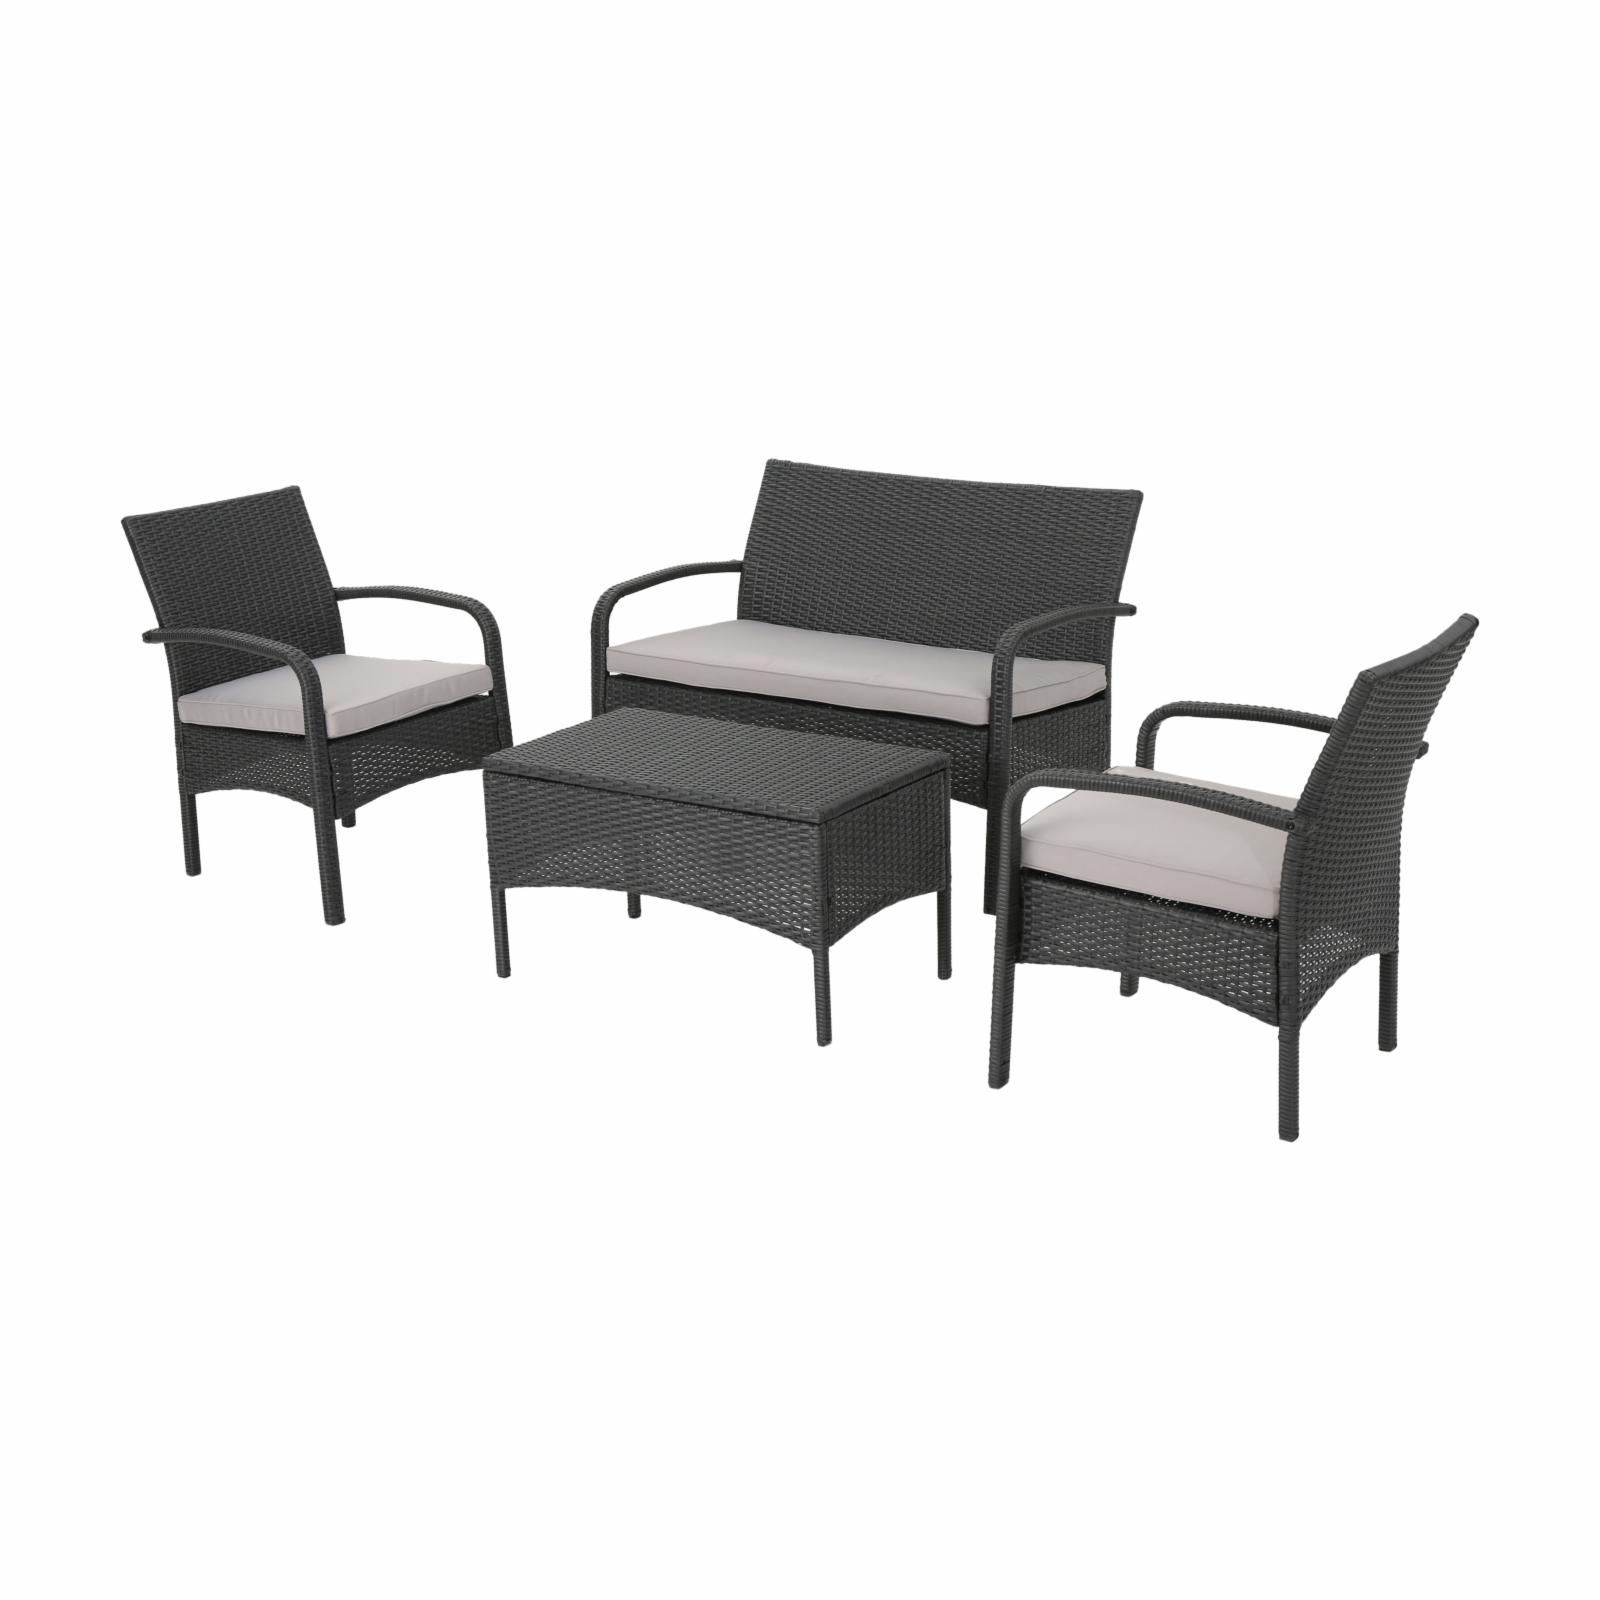 Christopher Knight Home Cordoba Outdoor Wicker 4-piece Conversation Set with Cushions by  Gray + Light Gray - image 1 of 11